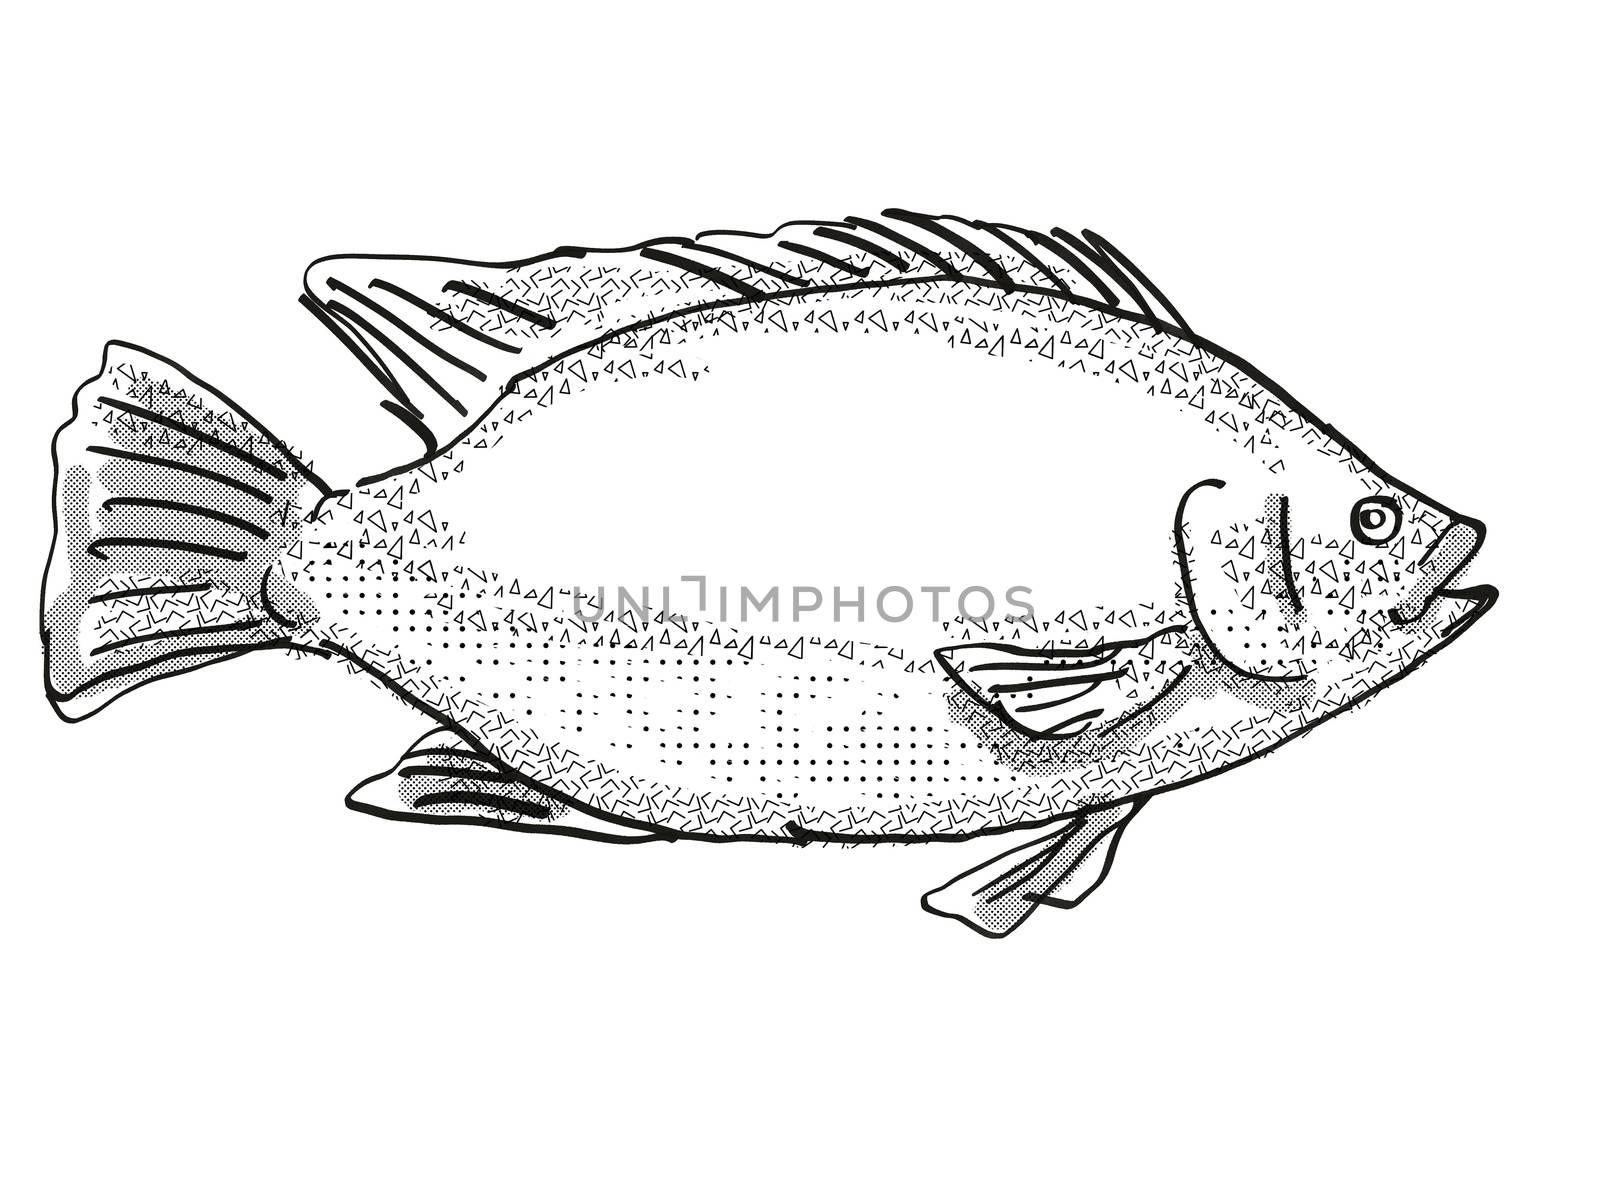 Retro cartoon style drawing of a Tilapia, a mainly freshwater fish marine life species viewed from side on isolated white background done in black and white